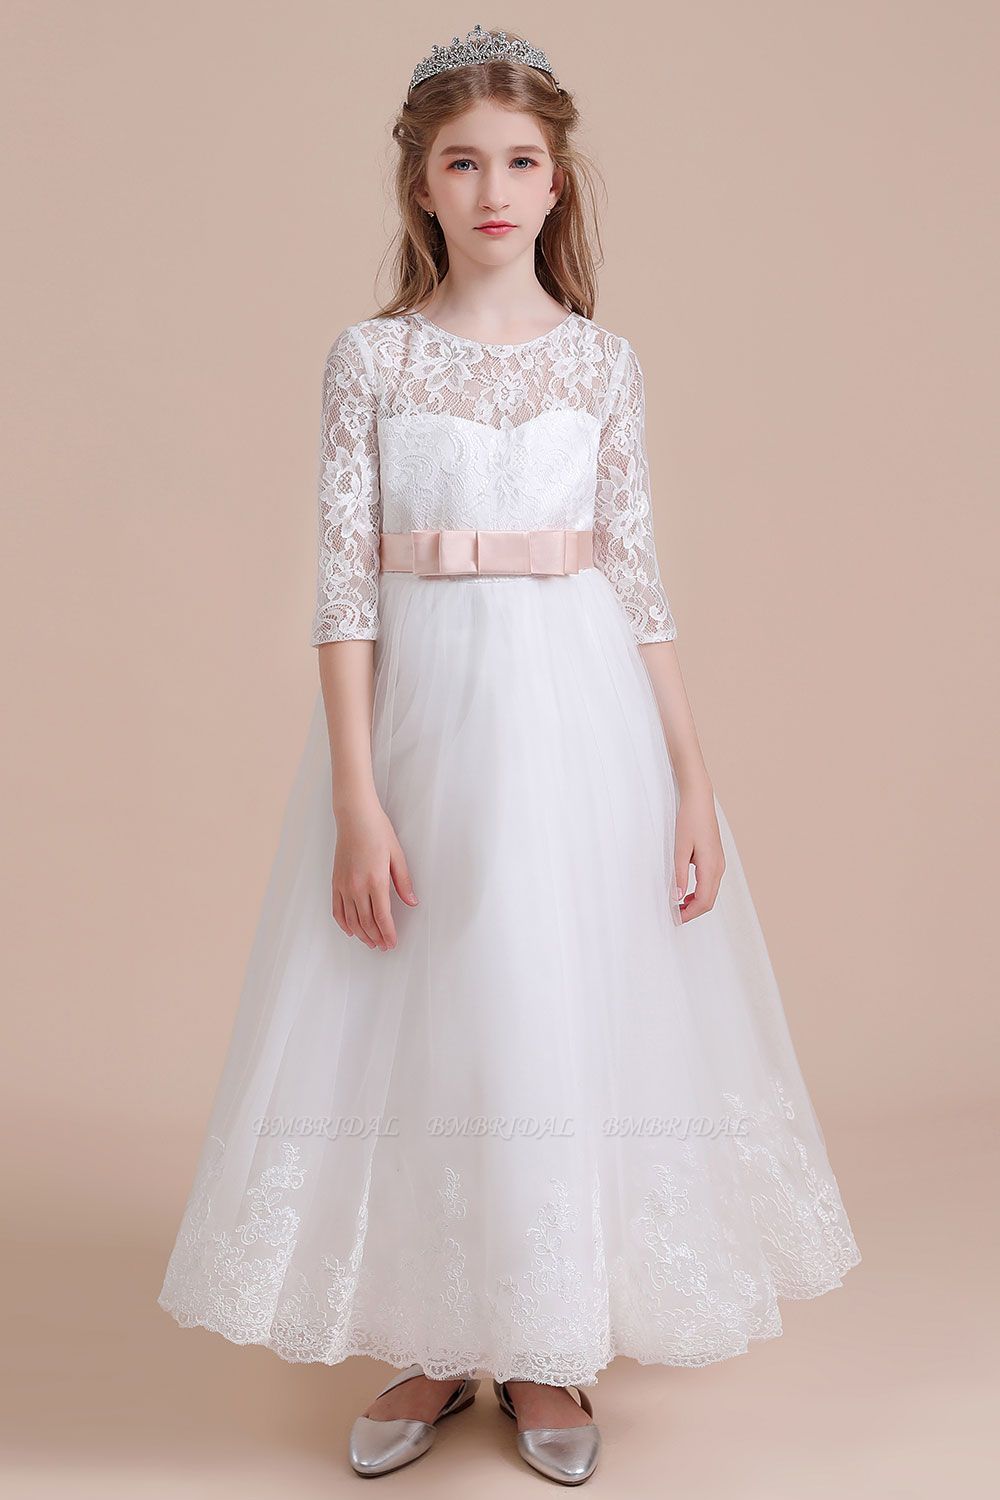 BMbridal A-Line Illusion Lace Tulle Ankle Length Flower Girl Dress On Sale